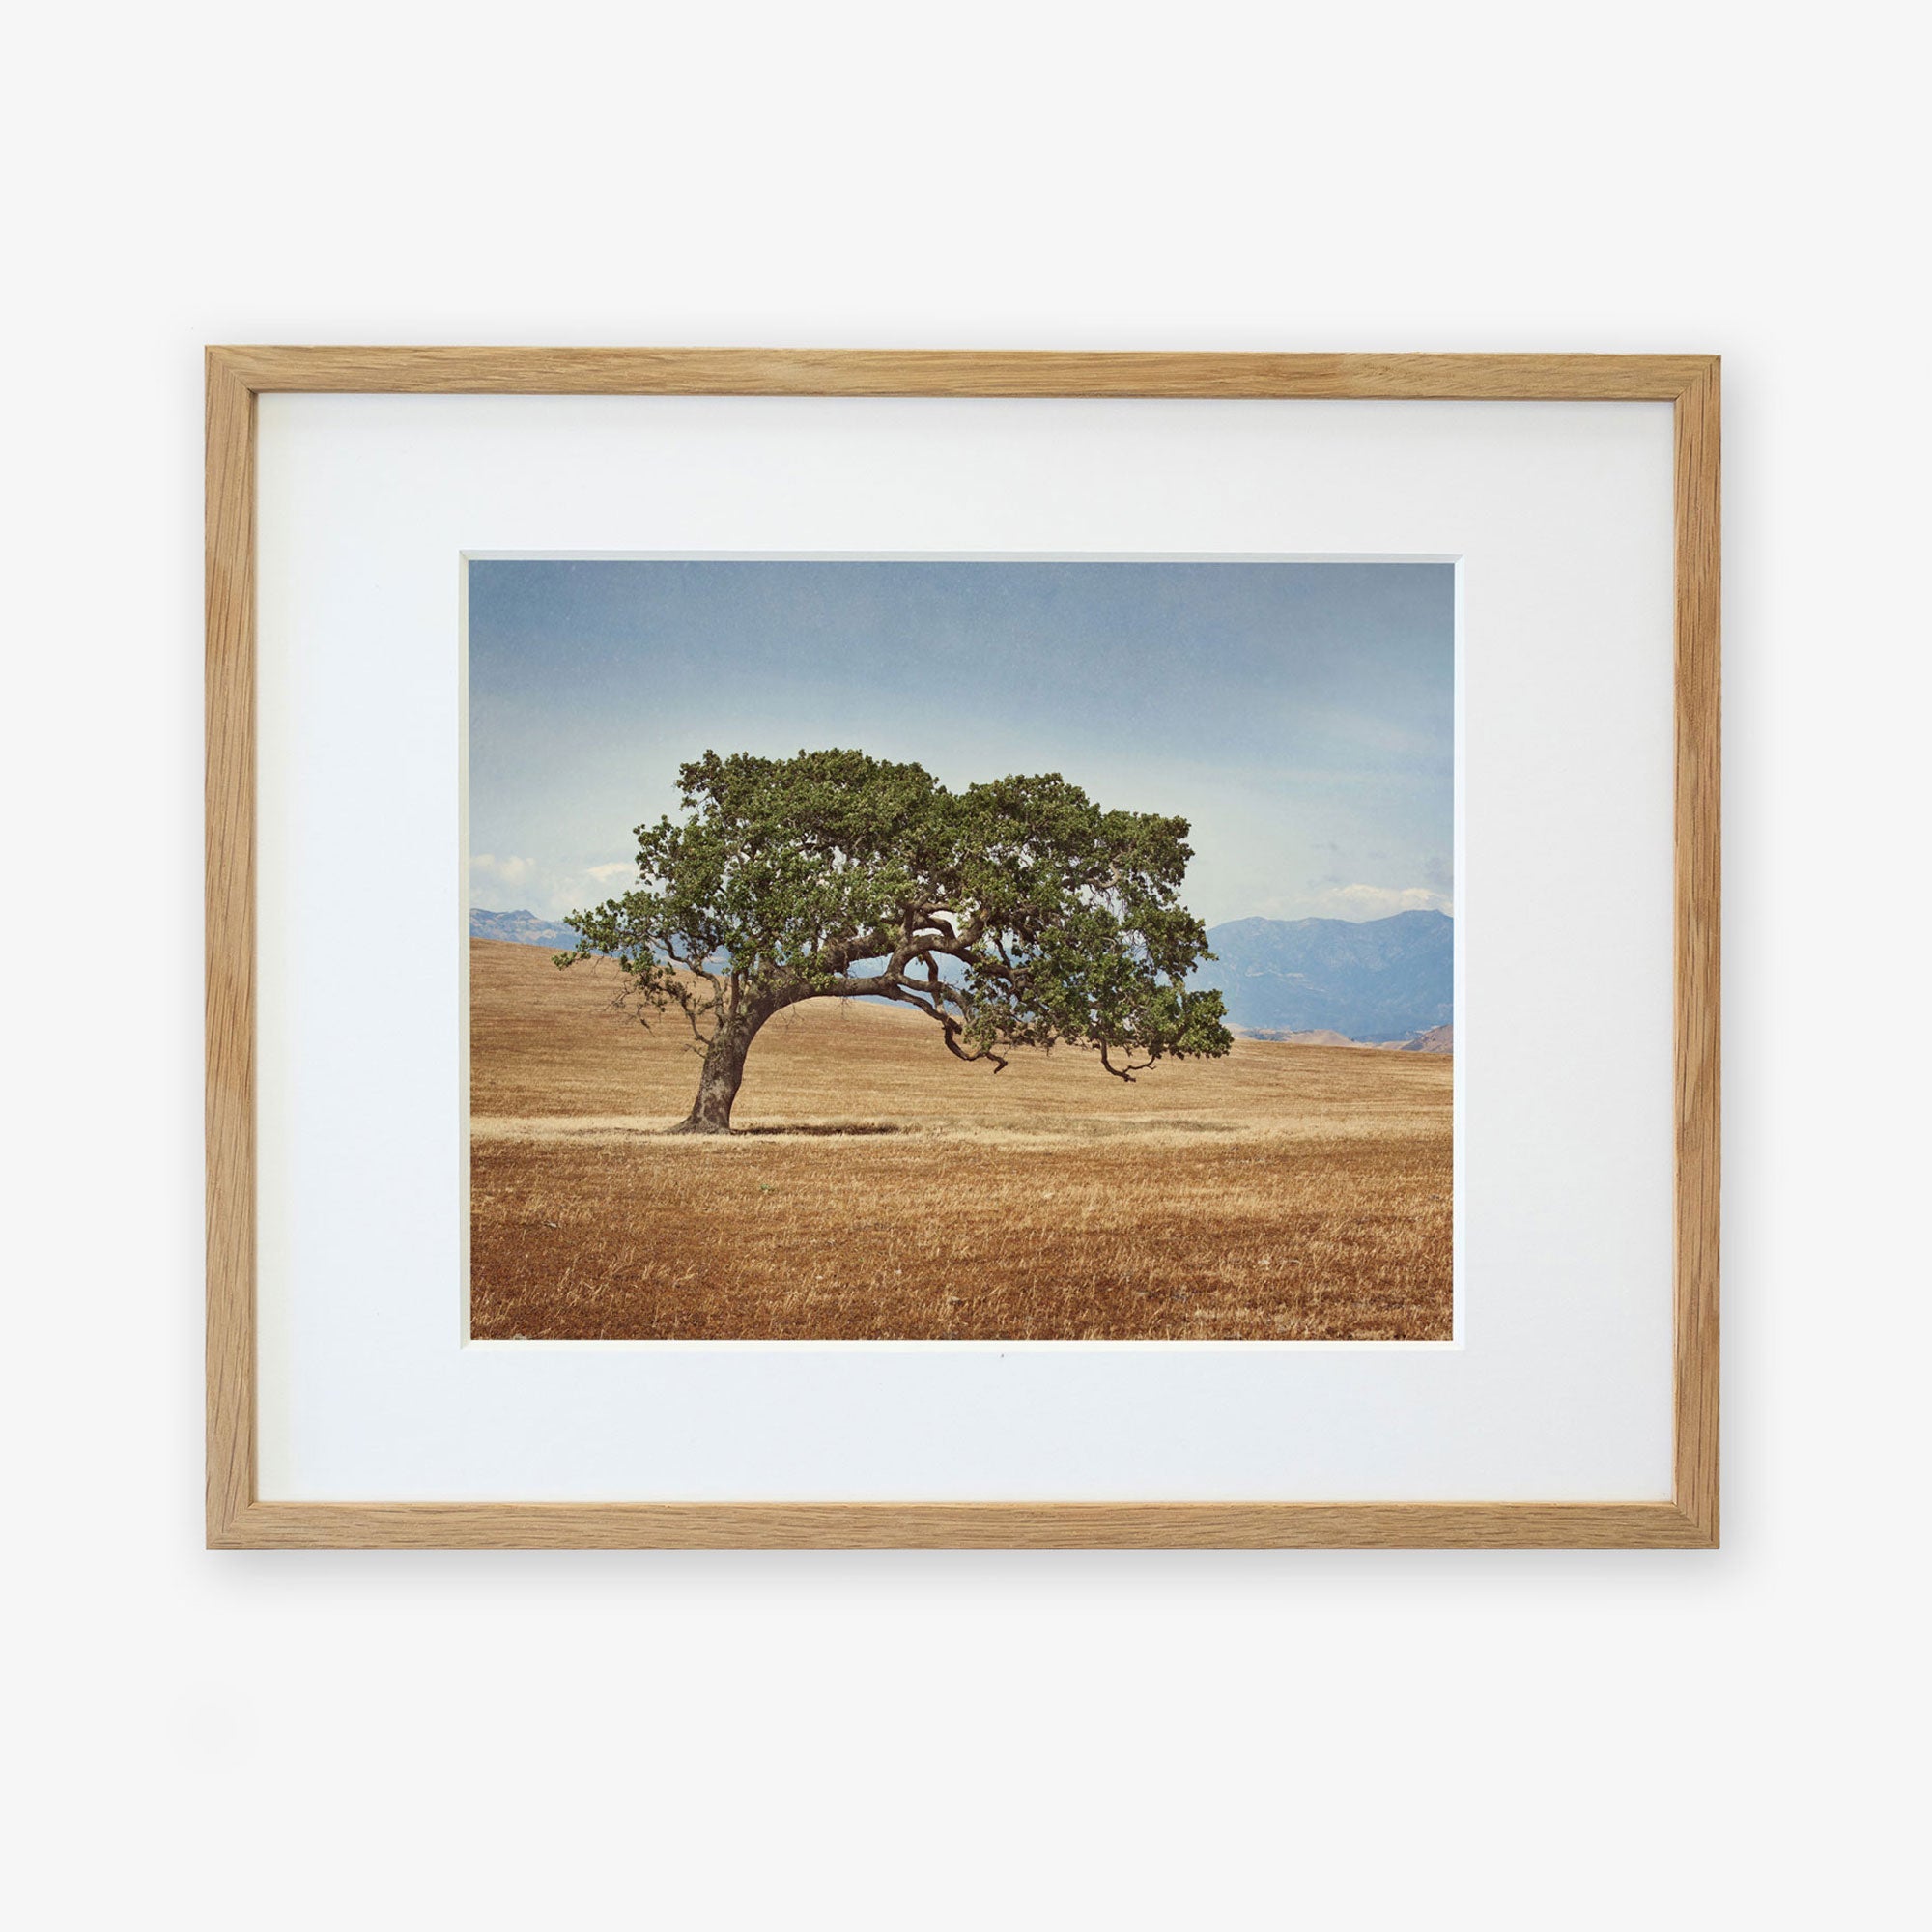 A framed Windswept California Oak Tree Print by Offley Green, featuring a solitary California Oak on a vast, brown grassy field in the Santa Ynez Valley with distant mountains under a clear sky, displayed in a light wooden frame against a white background.